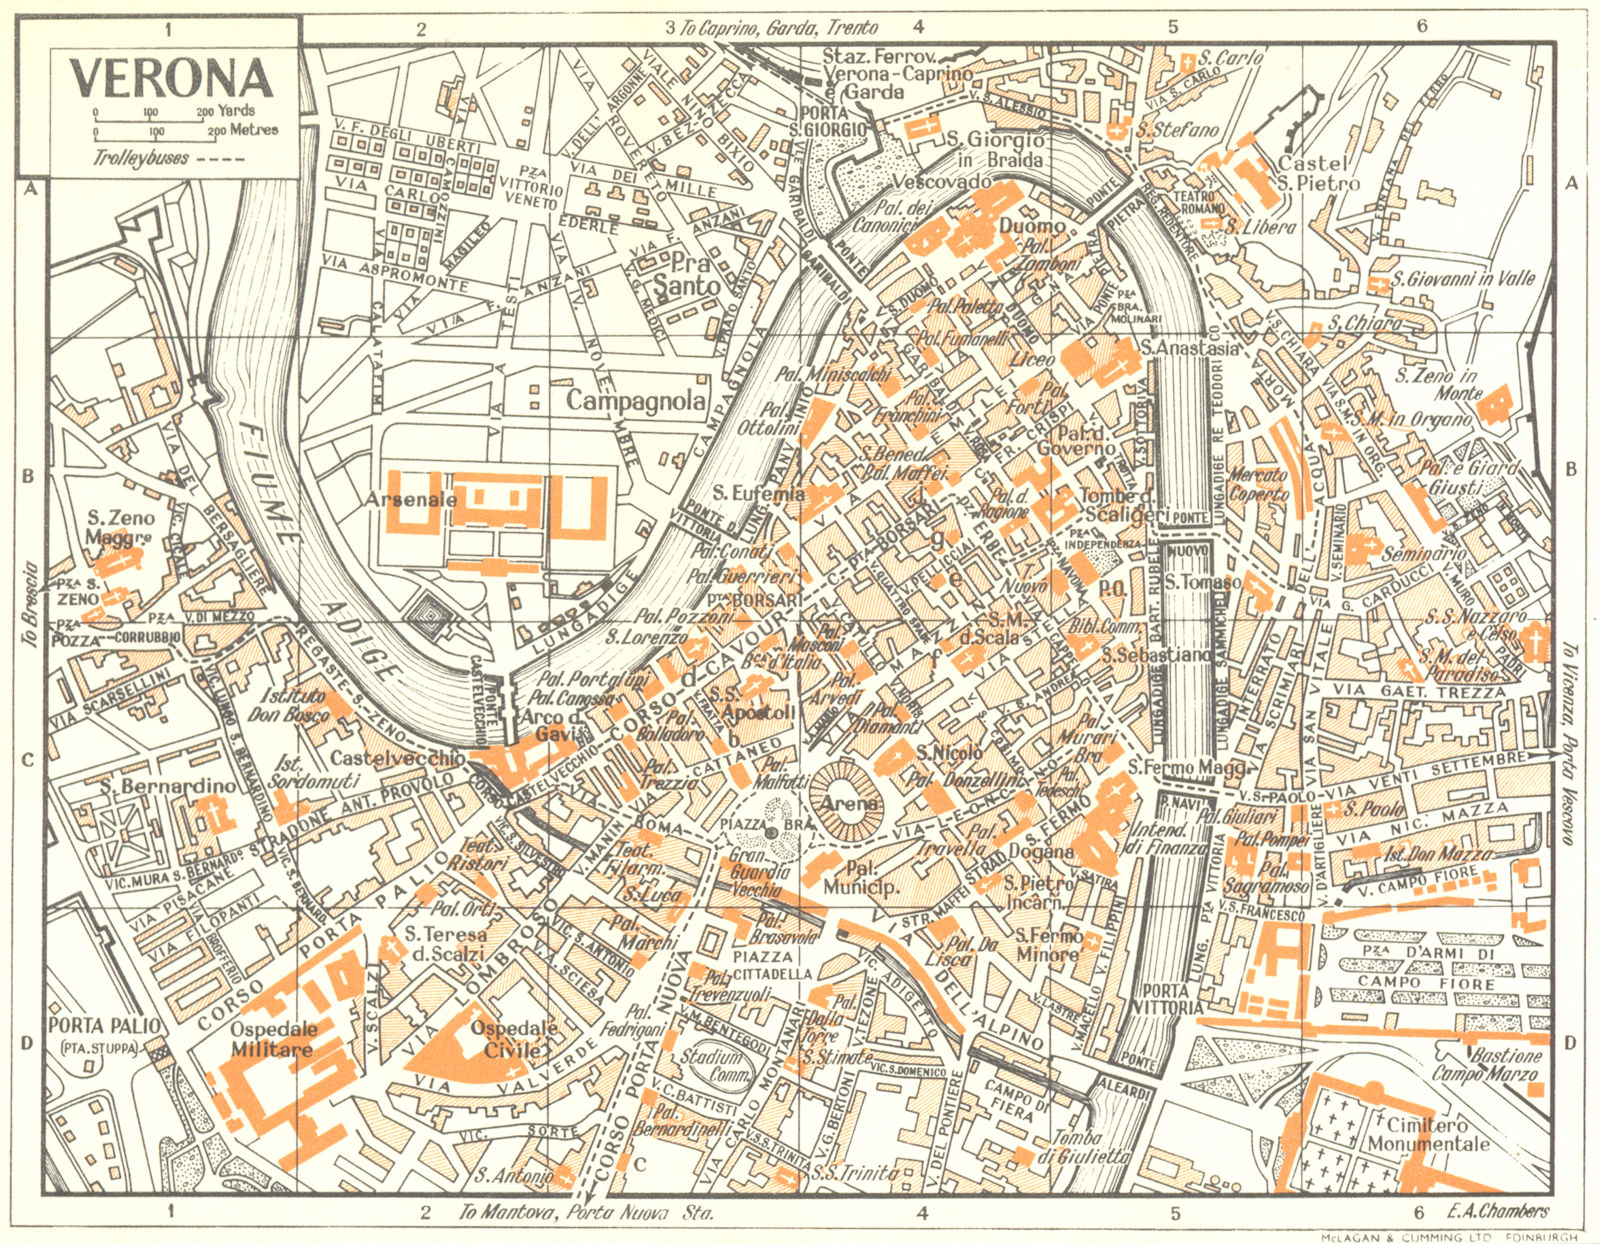 Associate Product VERONA town/city plan. Italy 1953 old vintage map chart